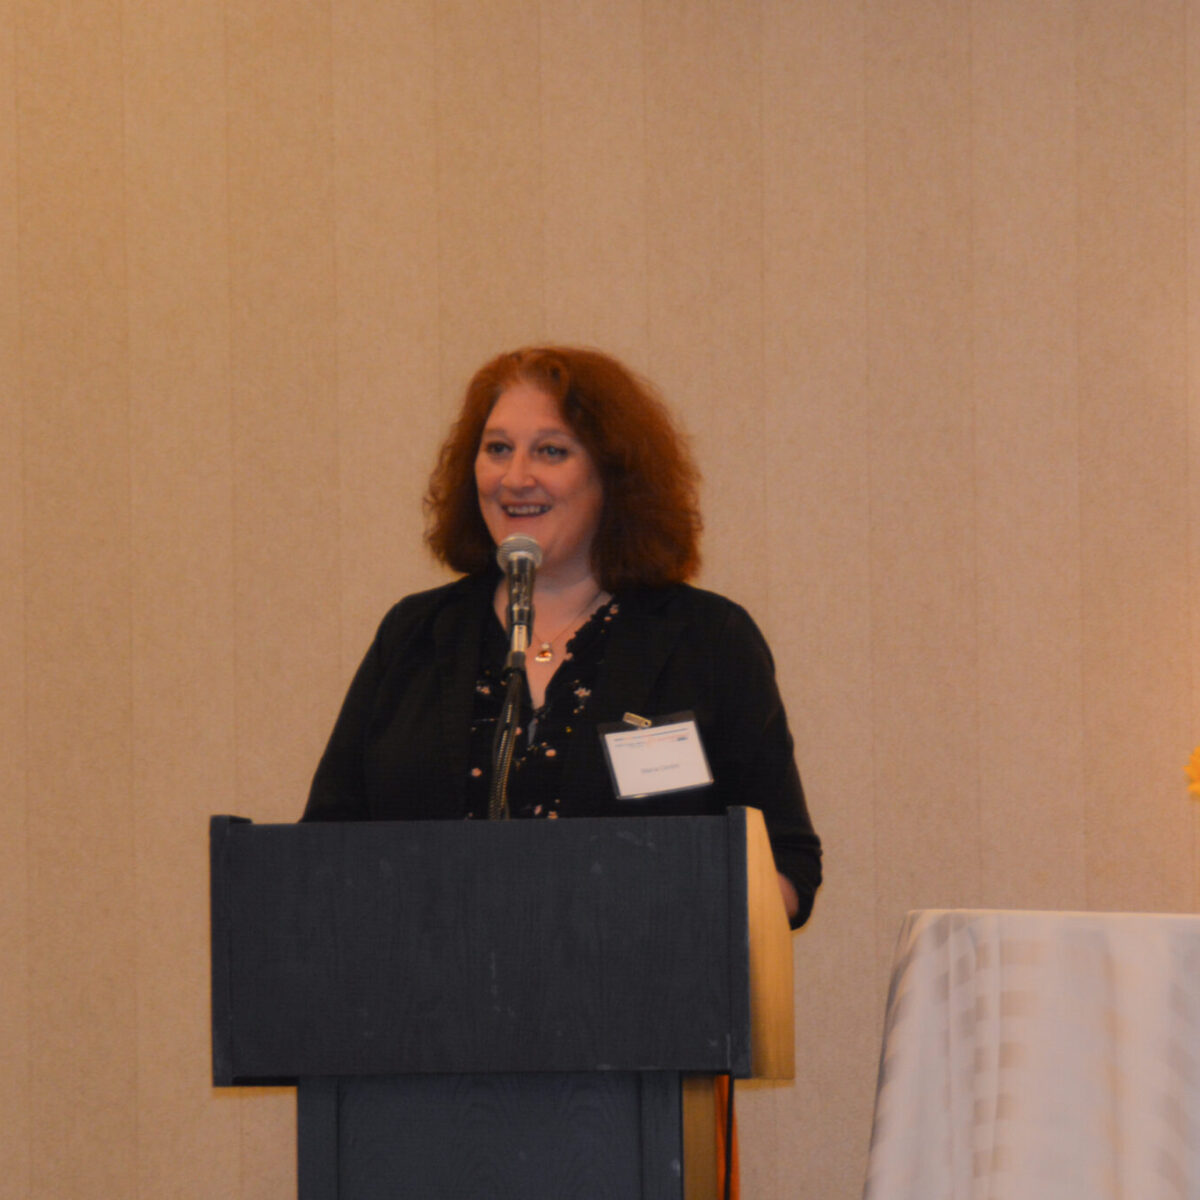 Maria Cimini, director of the Rhode Island Office of Healthy Aging, giving welcoming remarks.